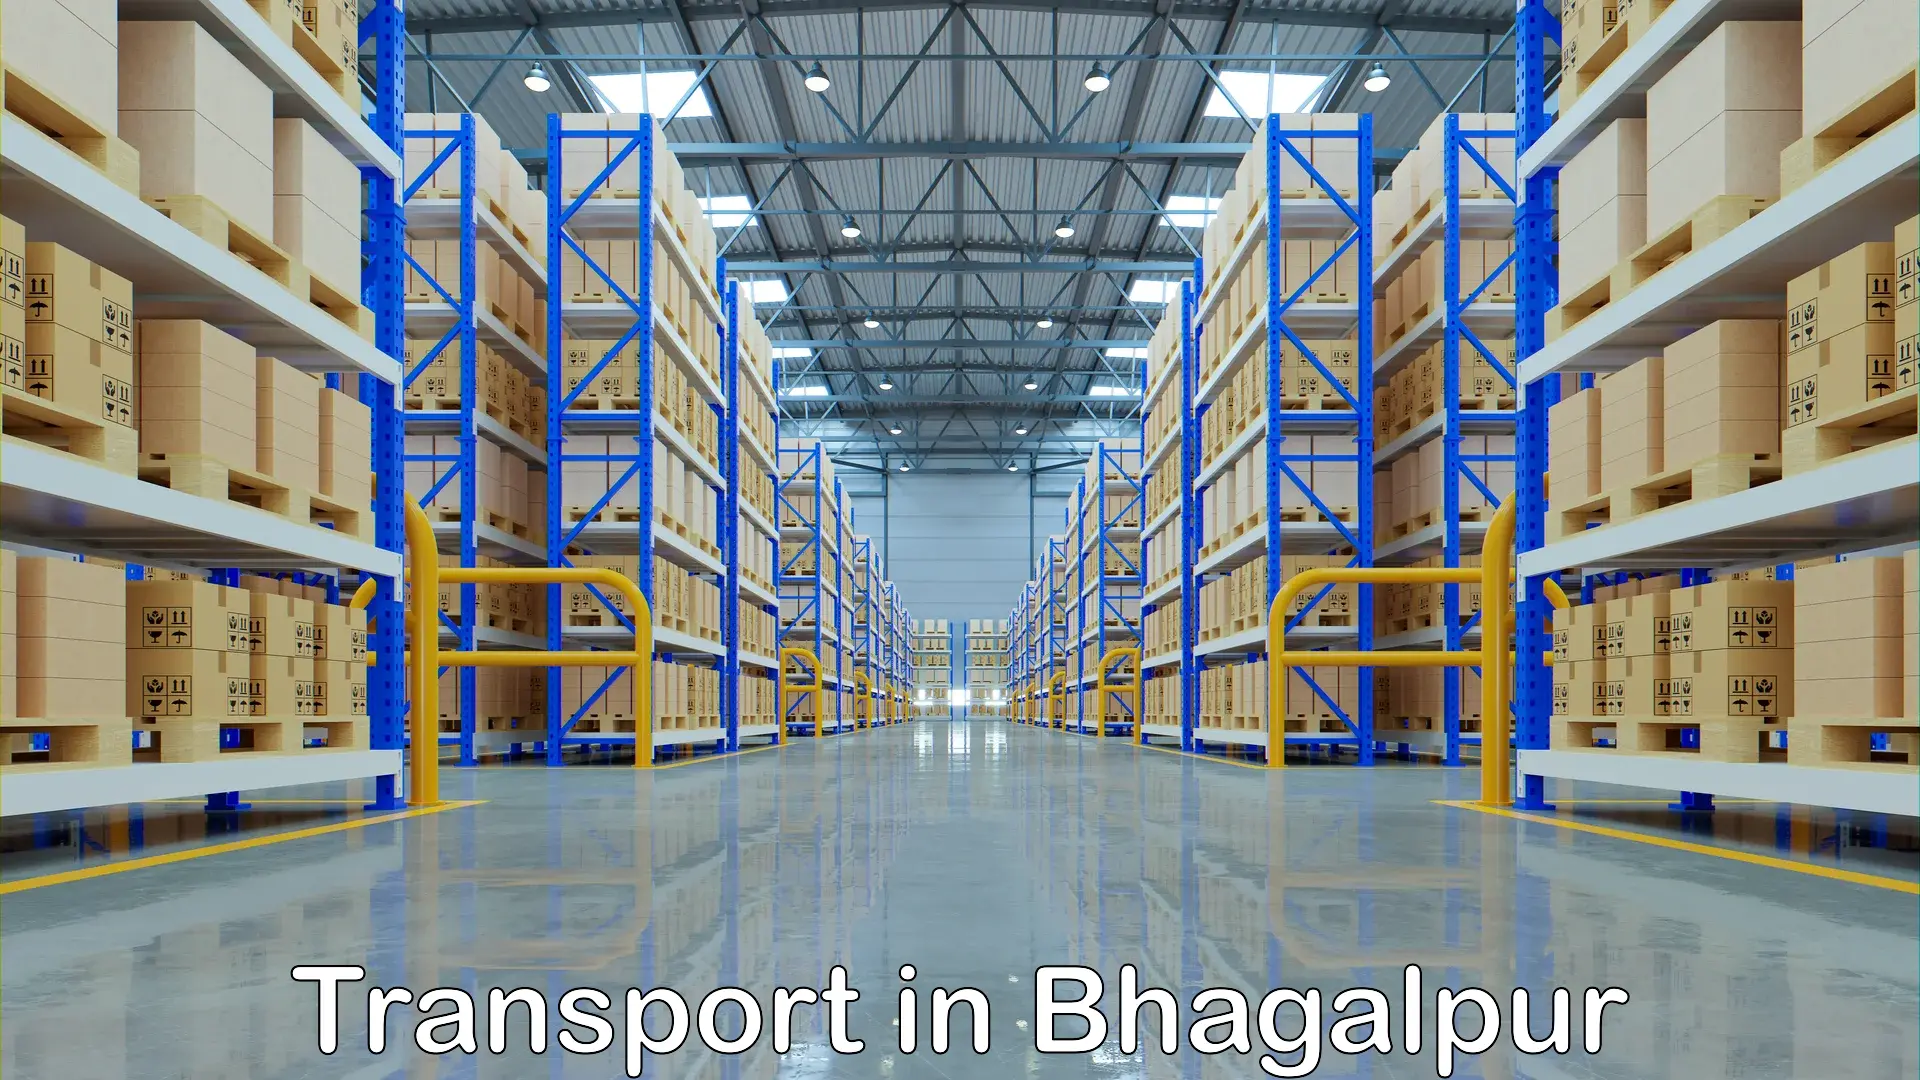 Transport bike from one state to another in Bhagalpur